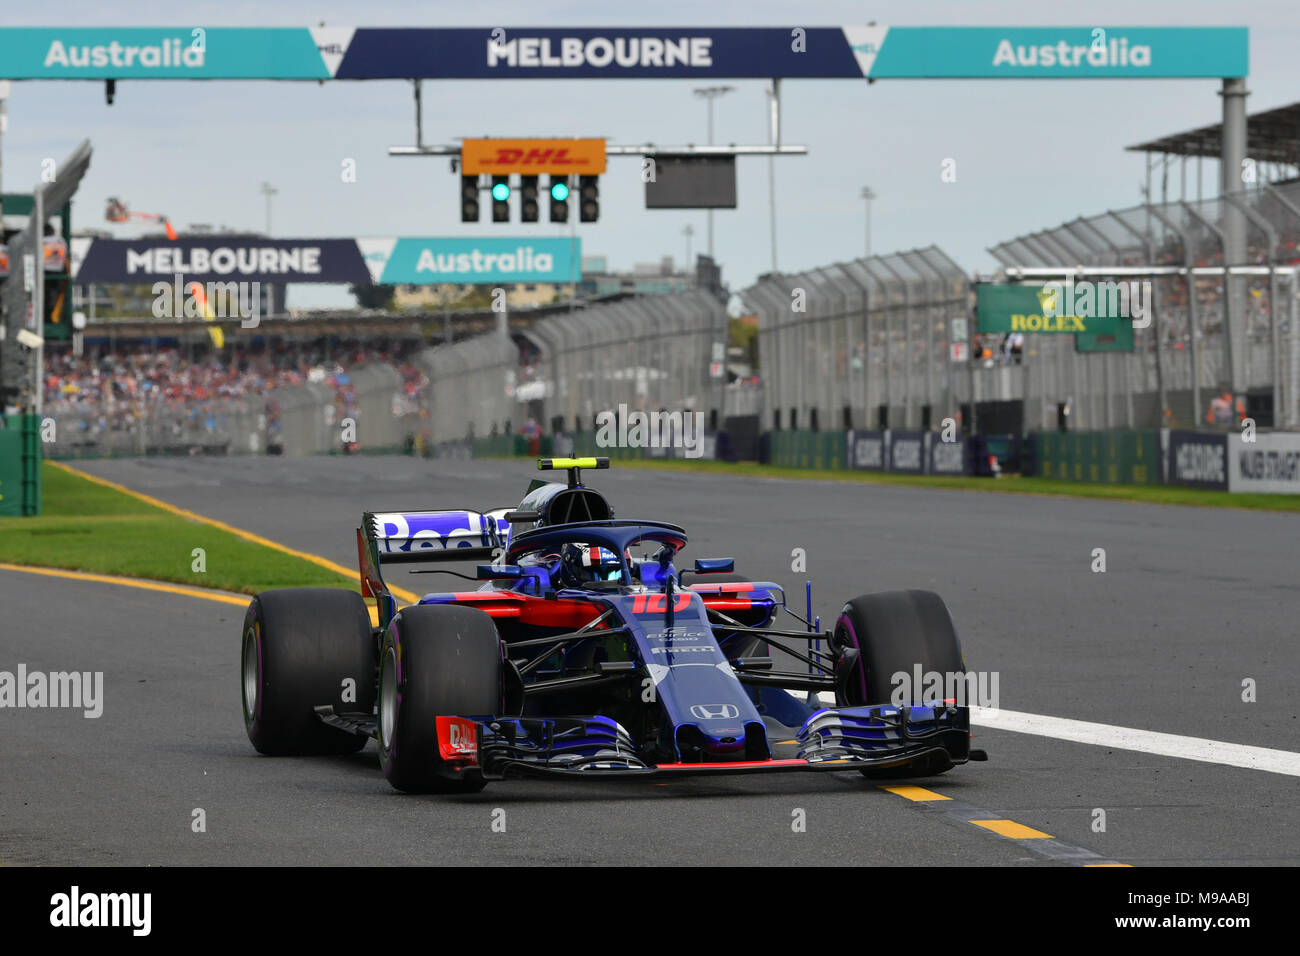 Albert Park, Melbourne, Australia. 24th Mar, 2018. Pierre Gasly (FRA) #10 from the Red Bull Toro Rosso Honda team leaves the pit for his qualifying lap at the 2018 Australian Formula One Grand Prix at Albert Park, Melbourne, Australia. Sydney Low/Cal Sport Media/Alamy Live News Stock Photo